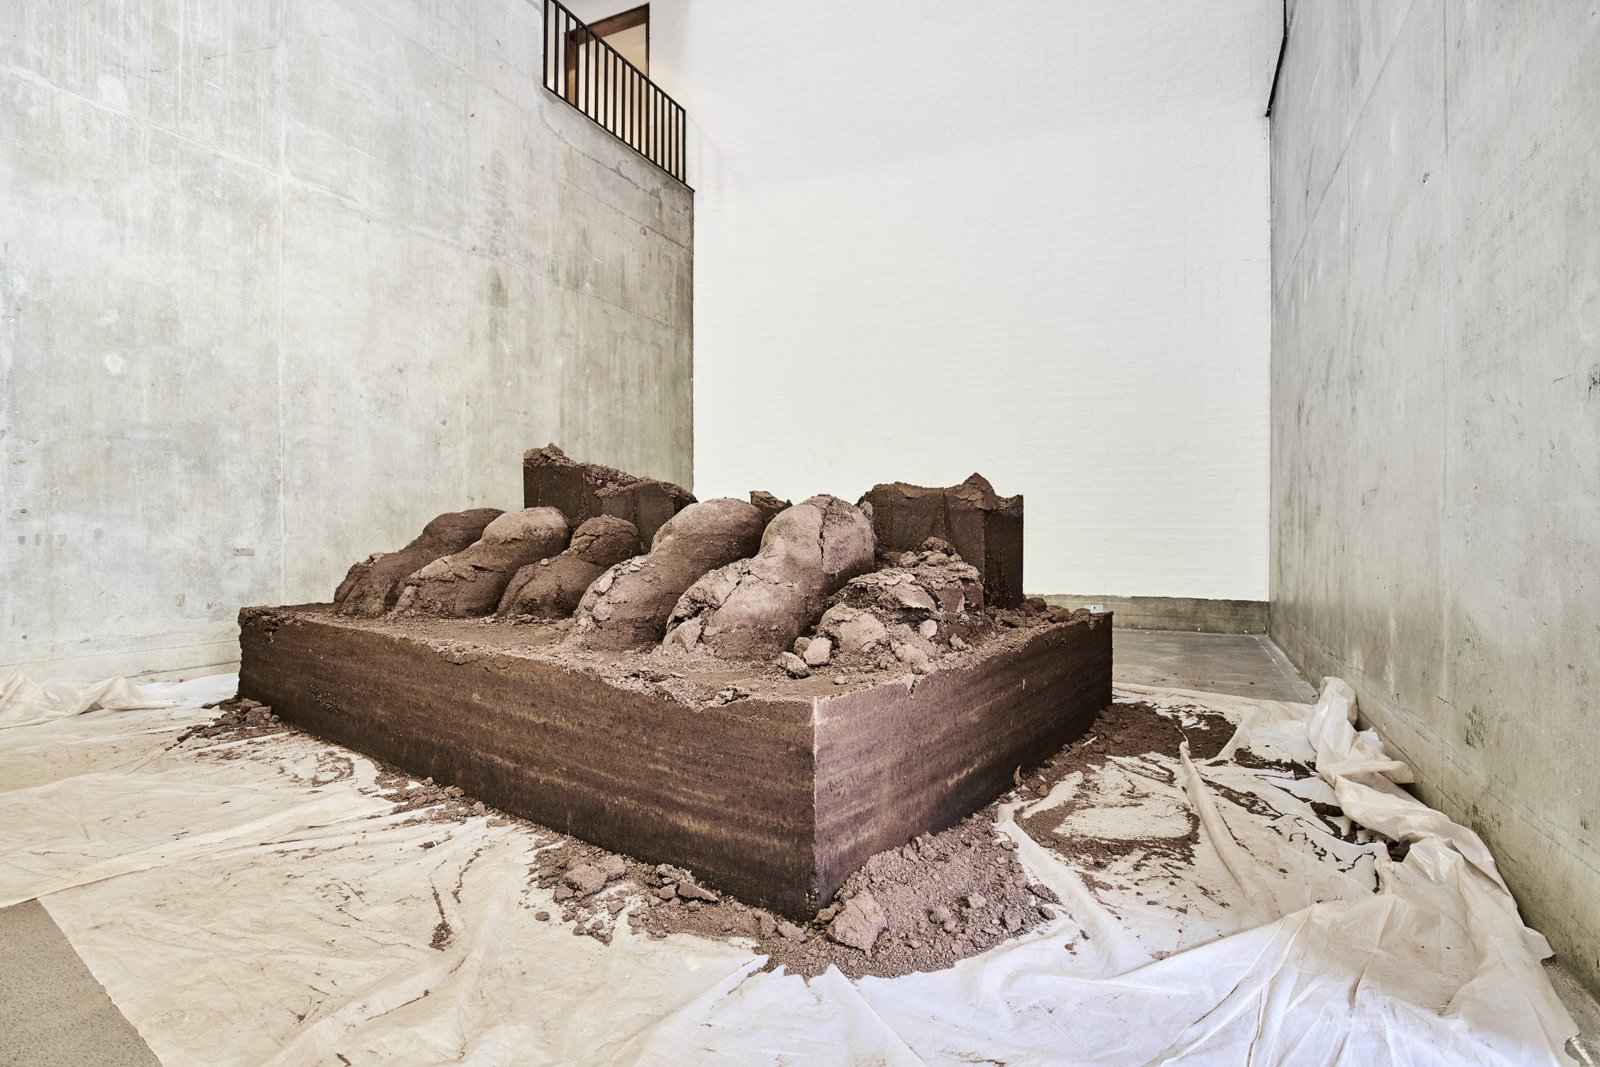 Abbas Akhavan, Variations on Ghost, 2017, soil, water, 47 x 126 x 87 in. (120 x 320 x 220 cm). Installation view, Beautiful world, where are you?, Bluecoat, Liverpool Biennial, 2018